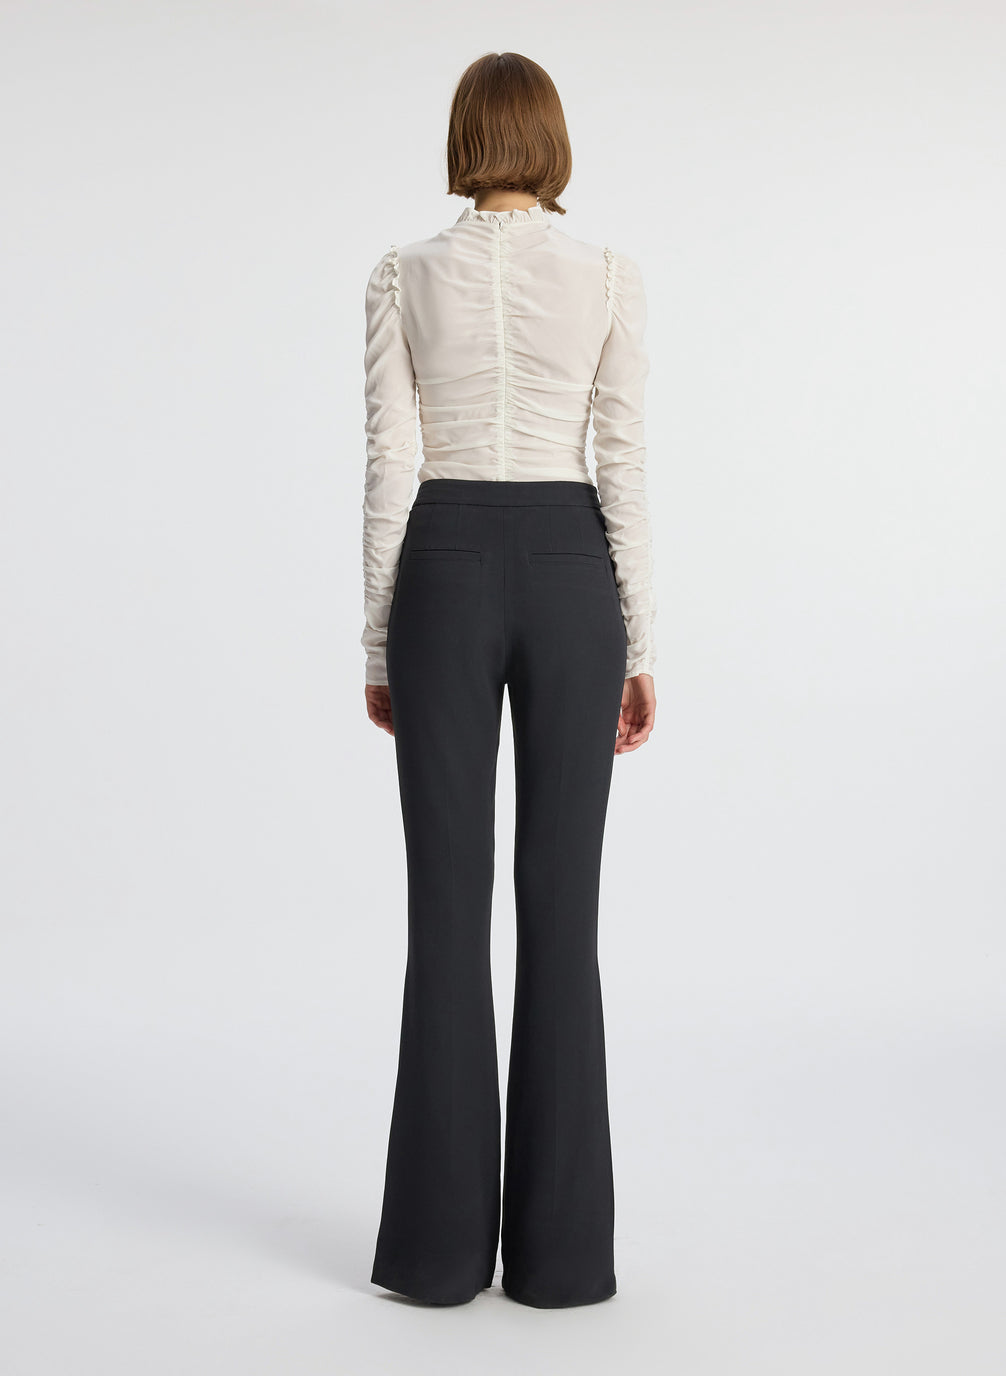 back view of woman wearing white long sleeve v neck top and black flared pants